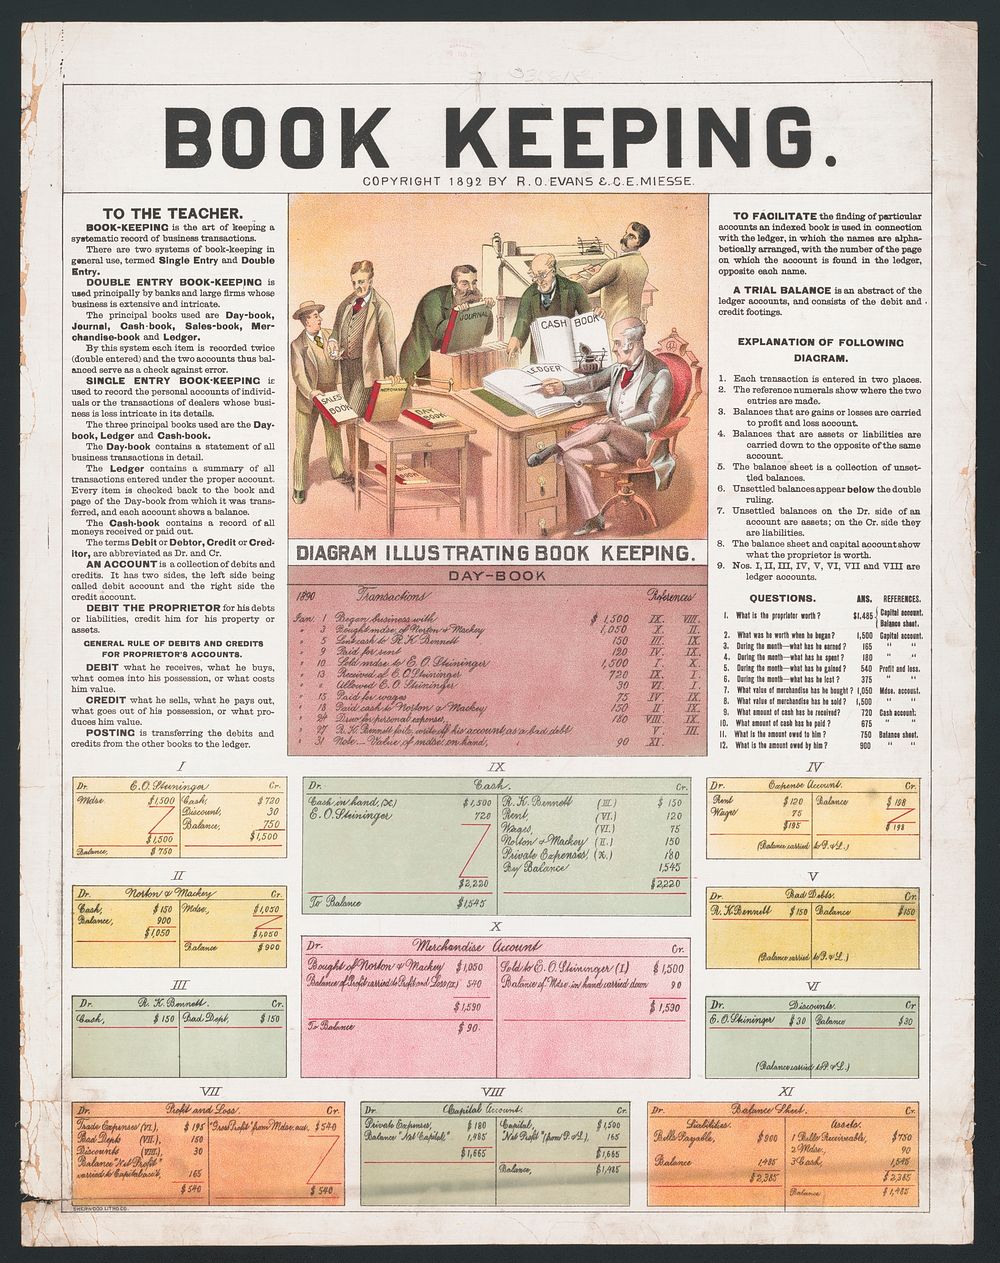 Book keeping, [United States] : [publisher not transcribed], 1892.